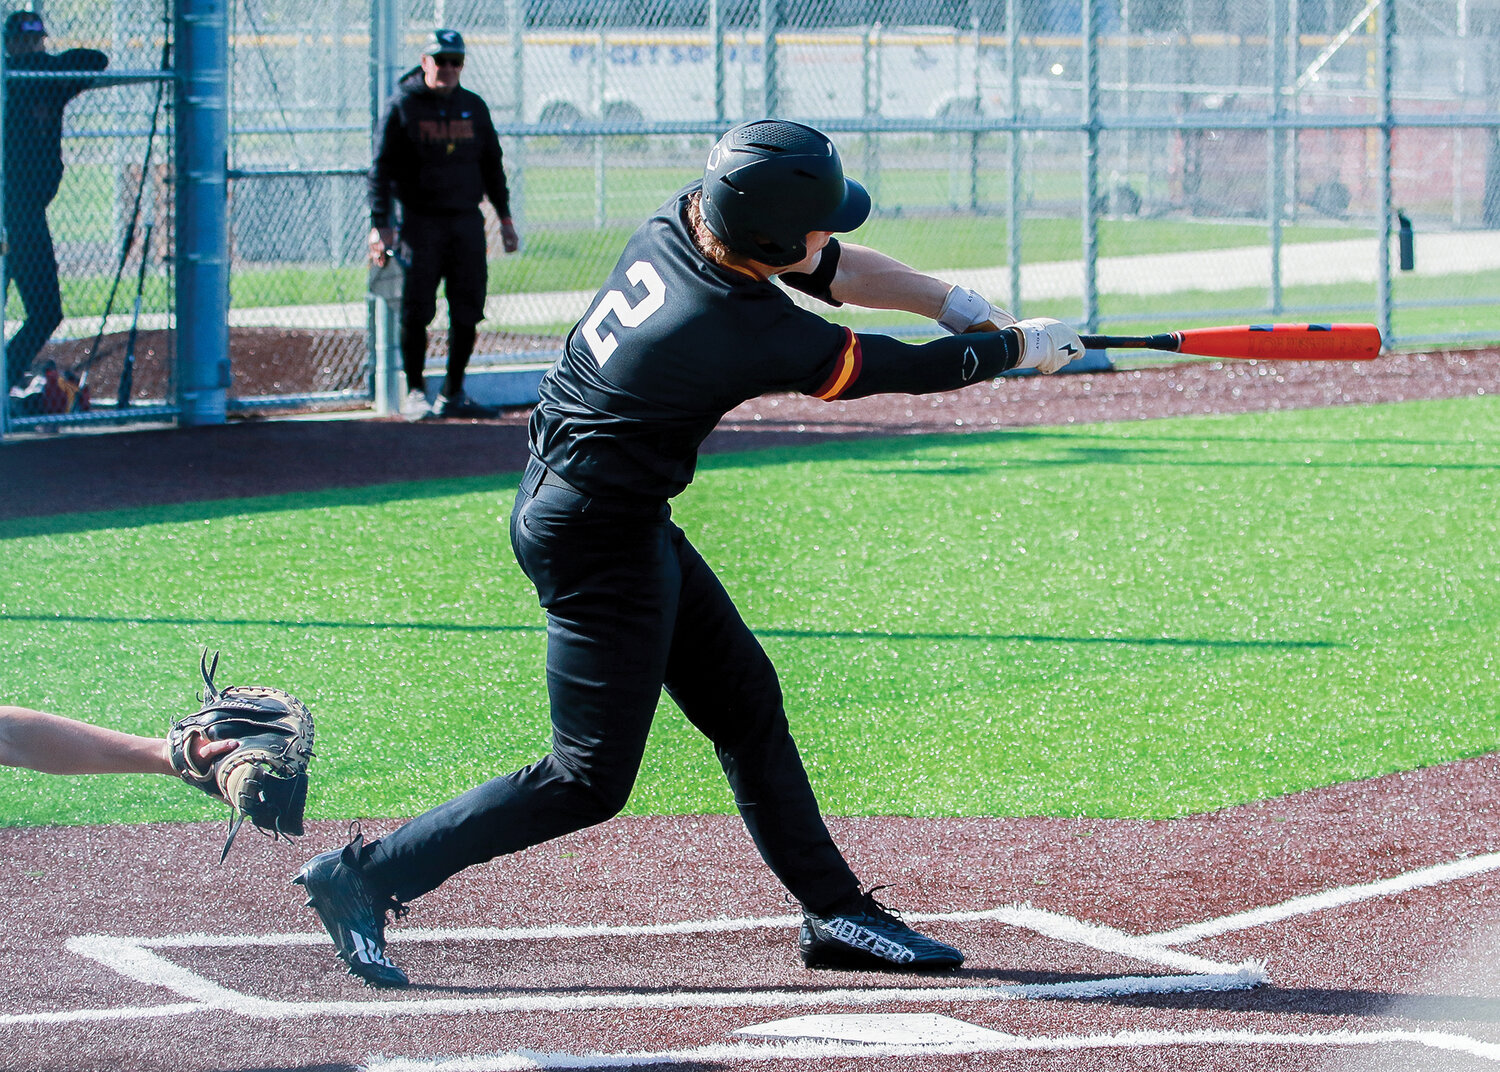 Prairie’s Dominick Vique takes a swing in their game one 12-4 loss to Gig Harbor on Tuesday, May 9.